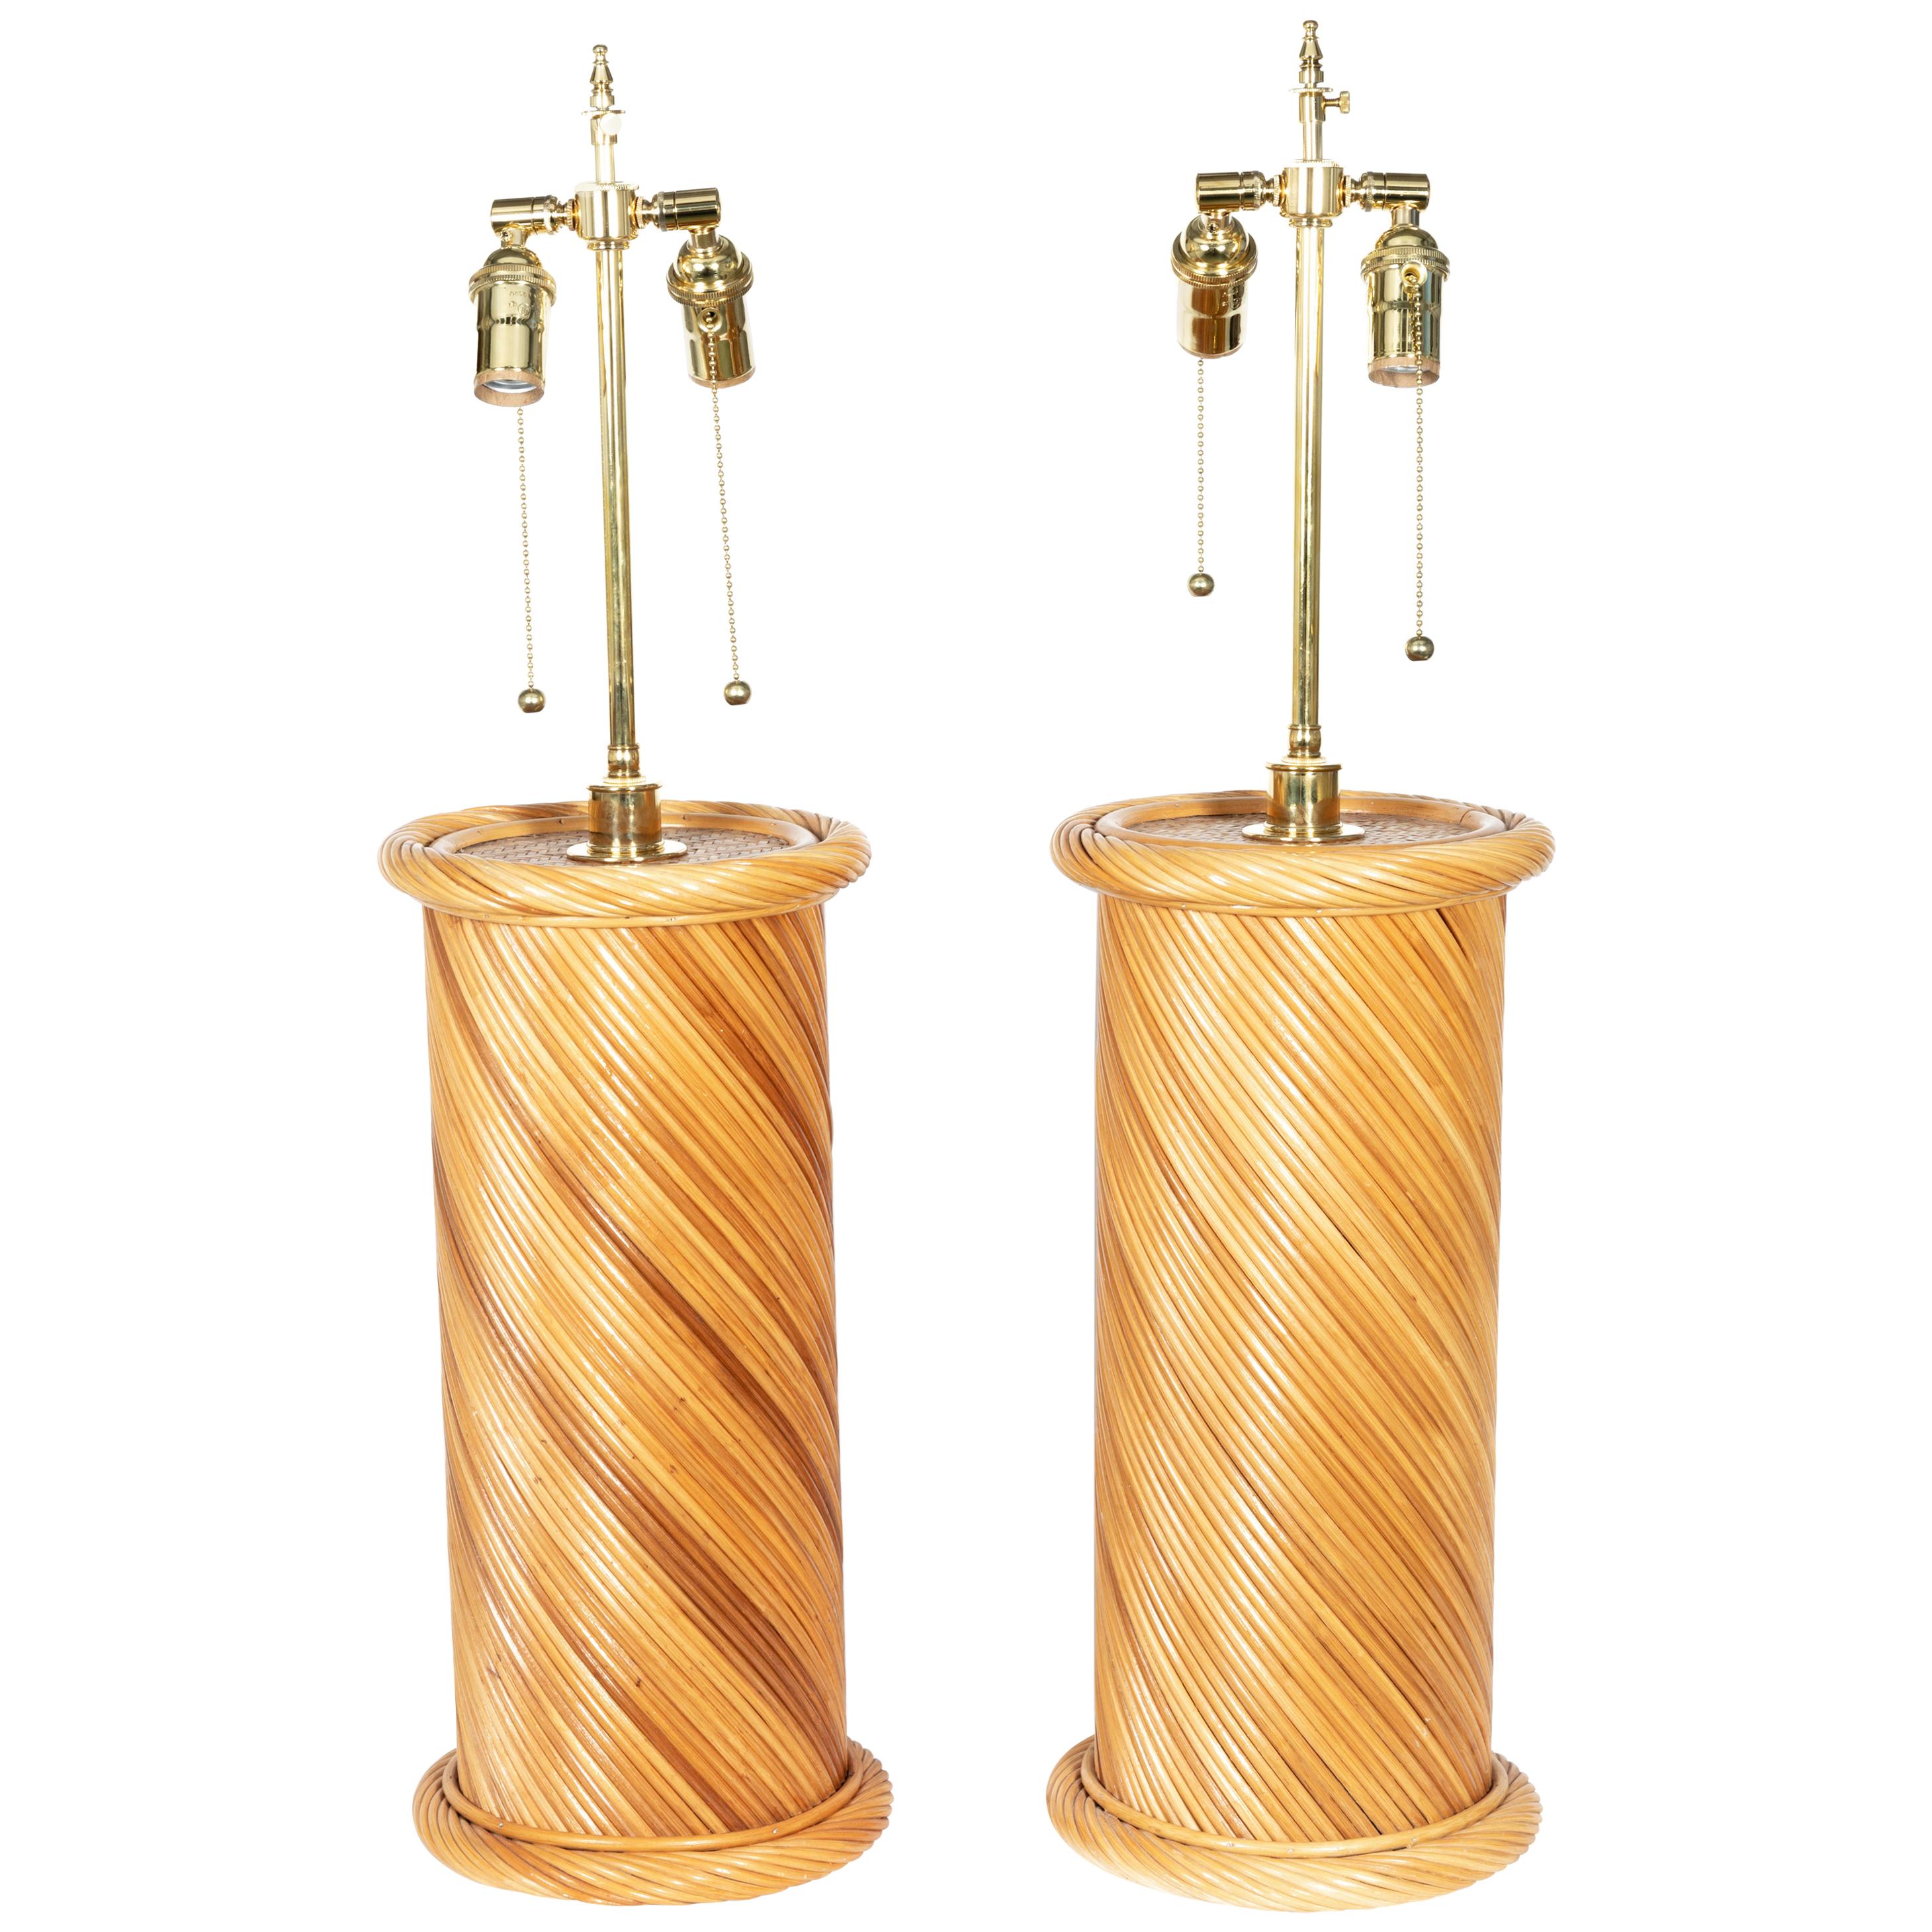 Pair of Rattan Woven Table Lamps with Brass Detail